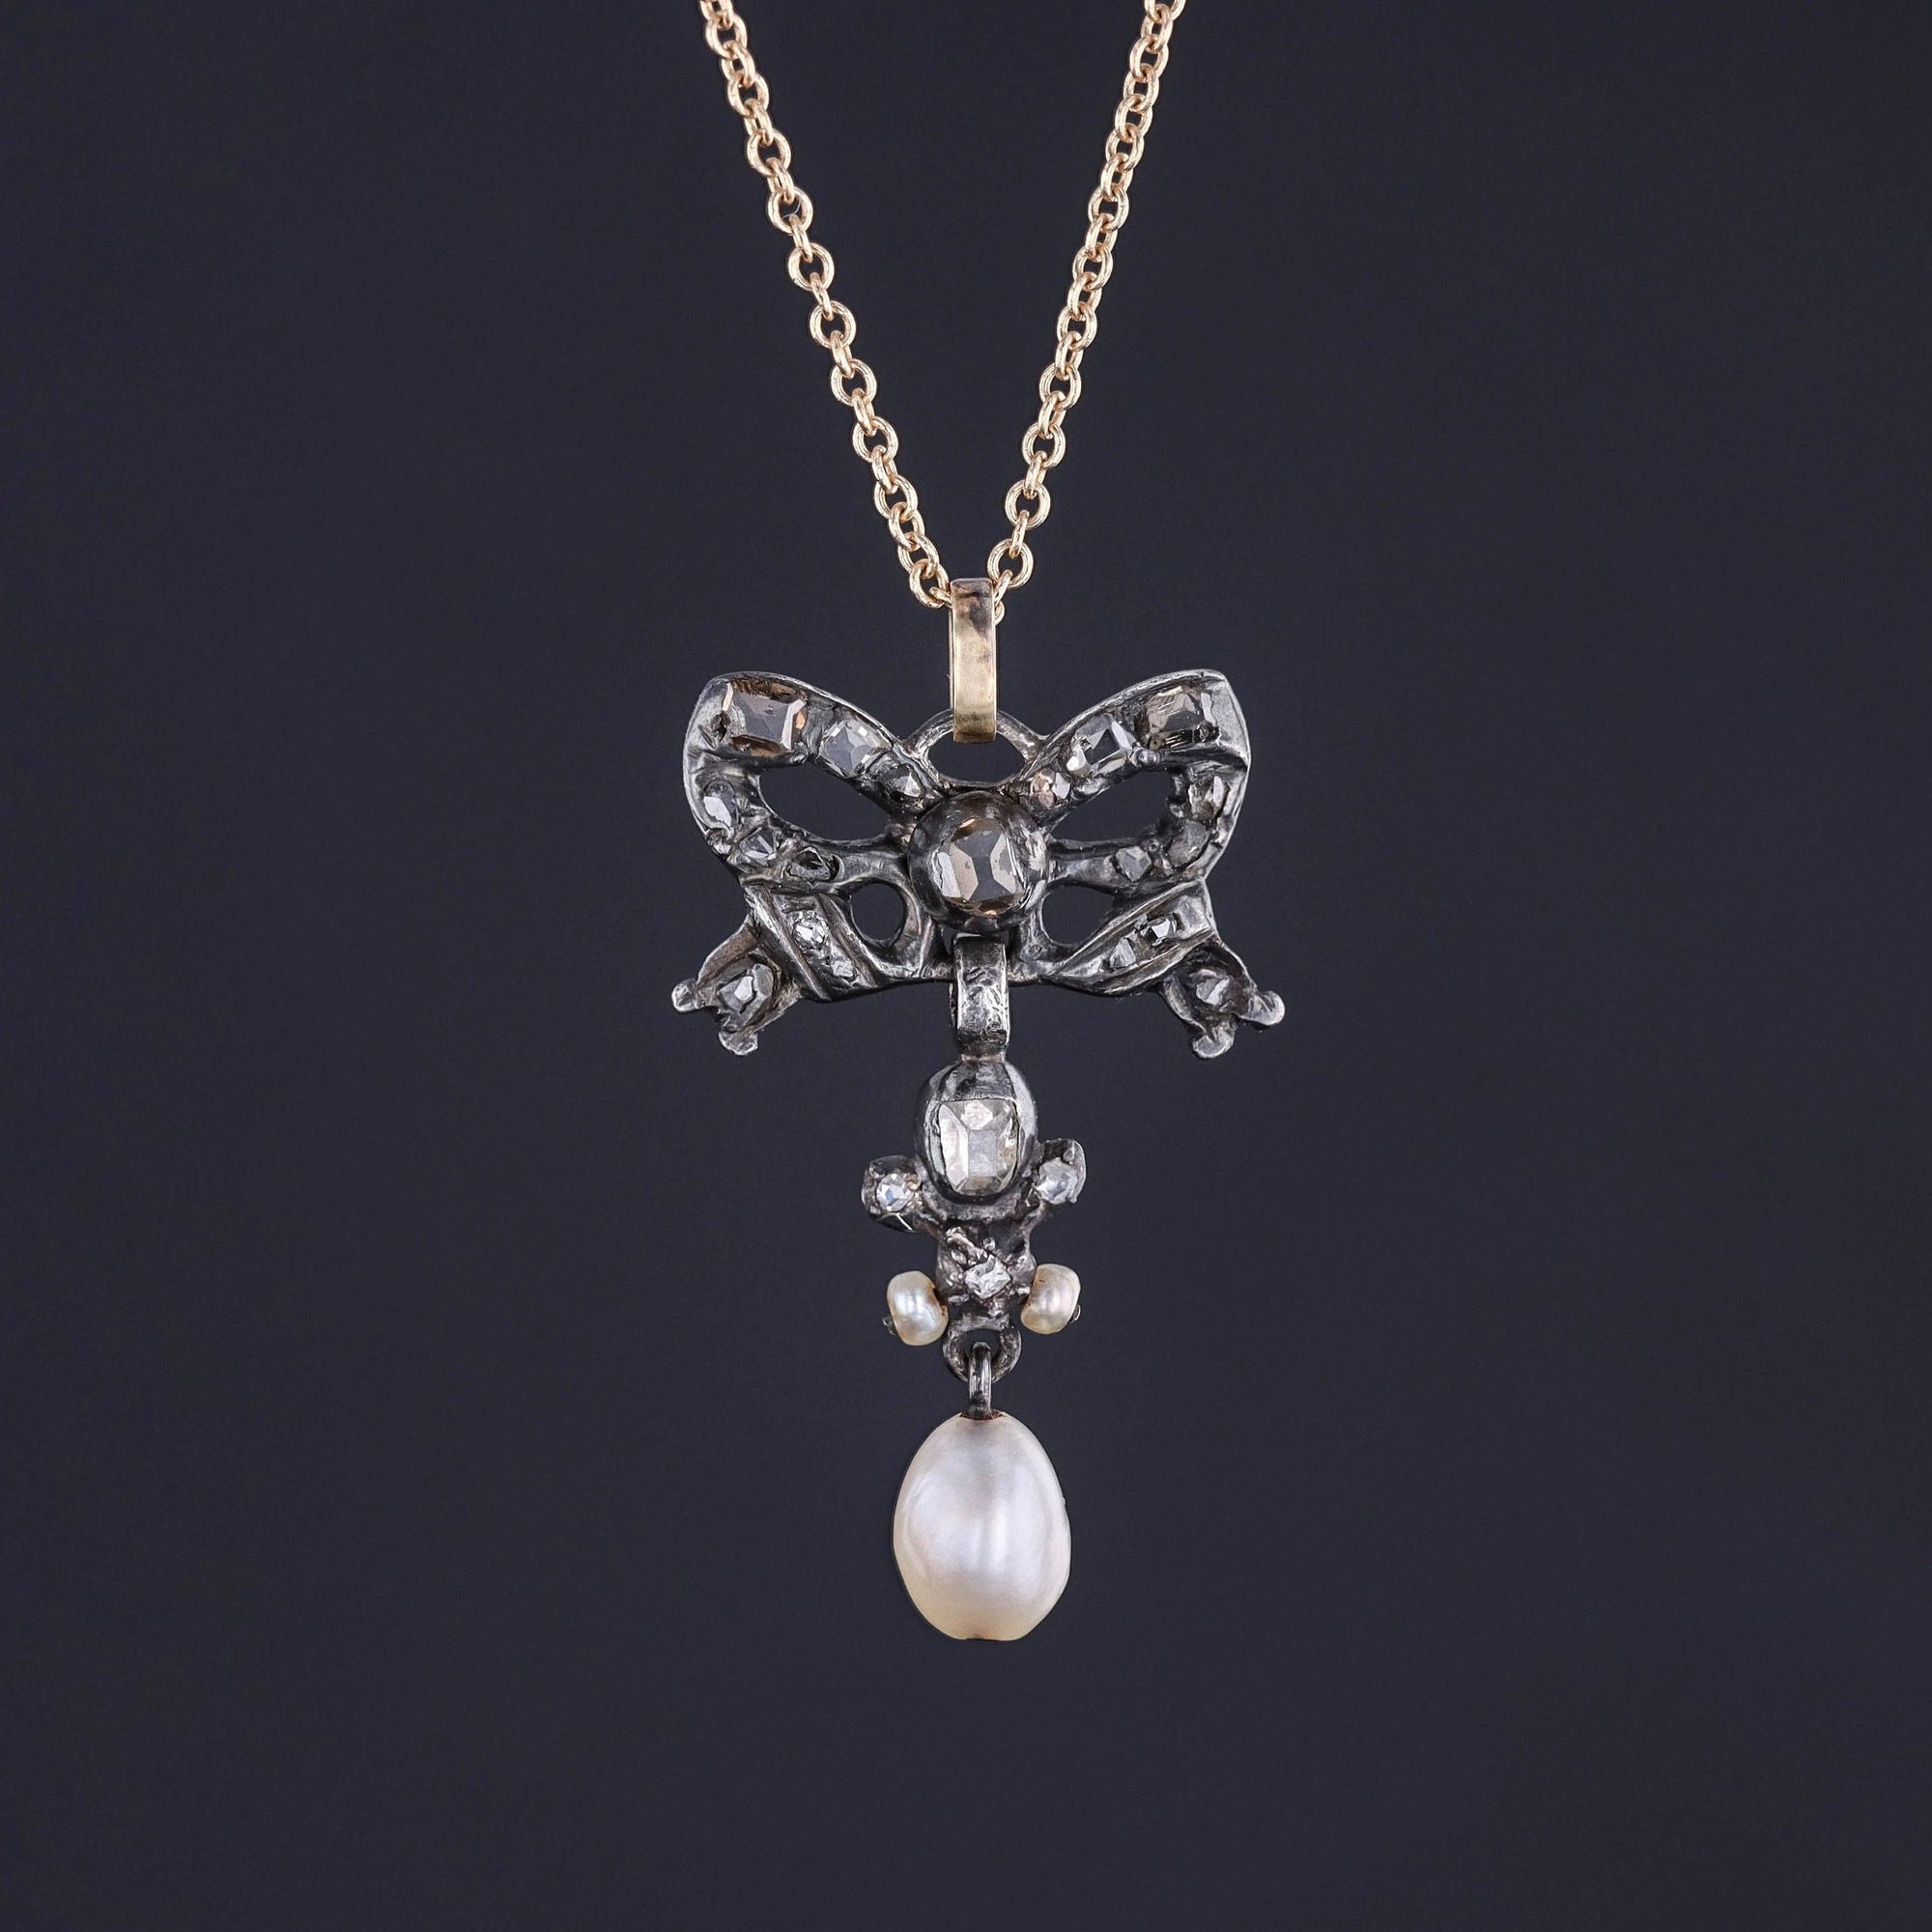 Antique Diamond and Pearl Bow Pendant